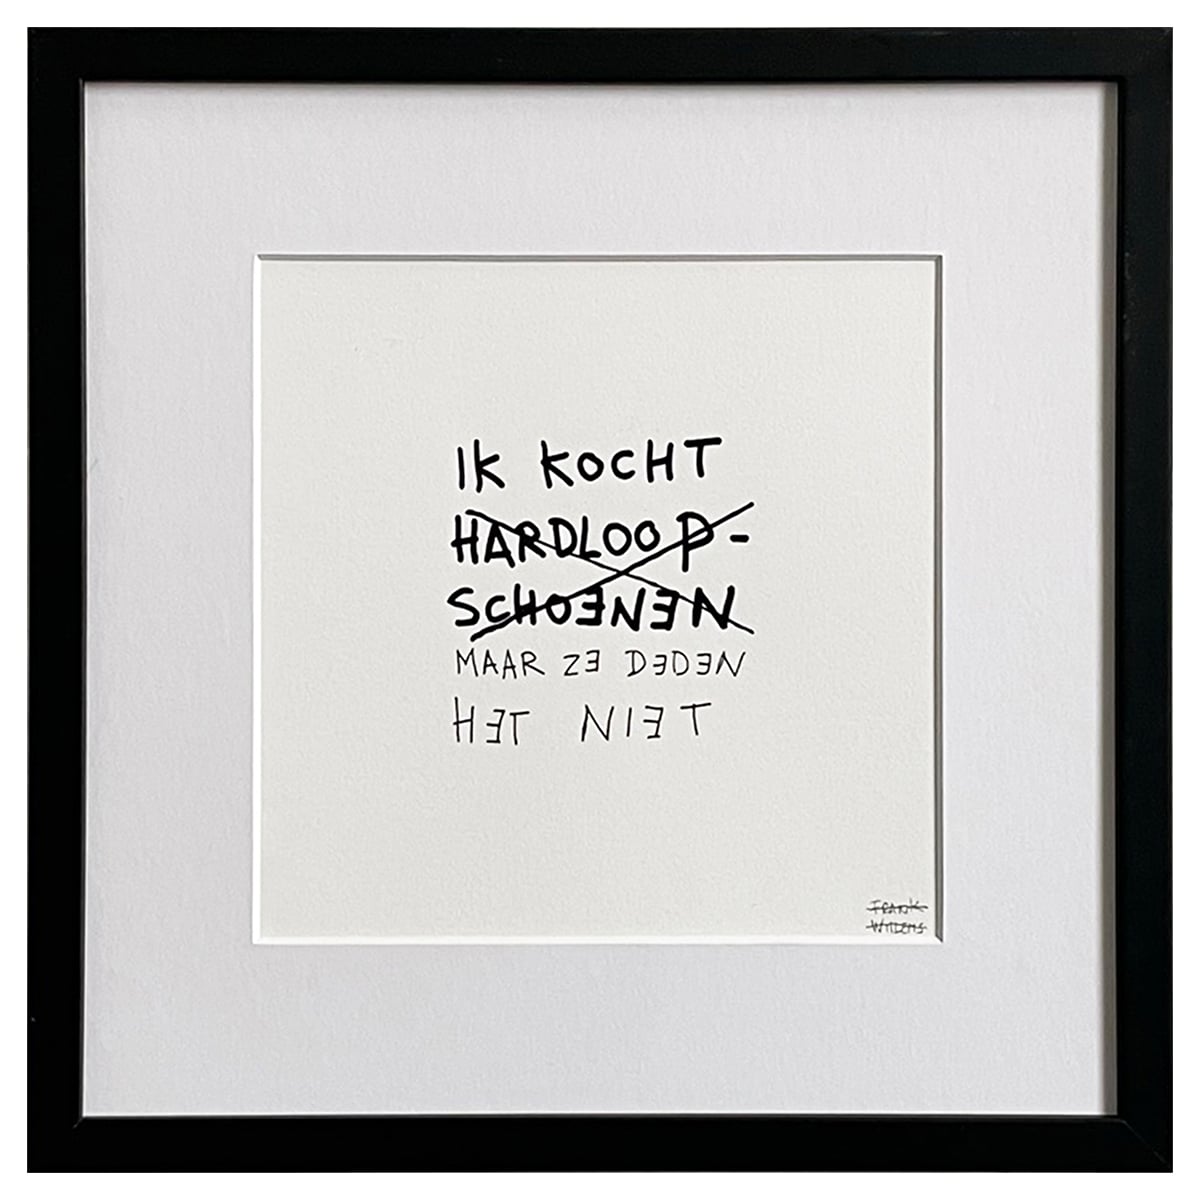 Limited Edt Text Prints - HARDLOOPSCHOENEN - Frank Willems